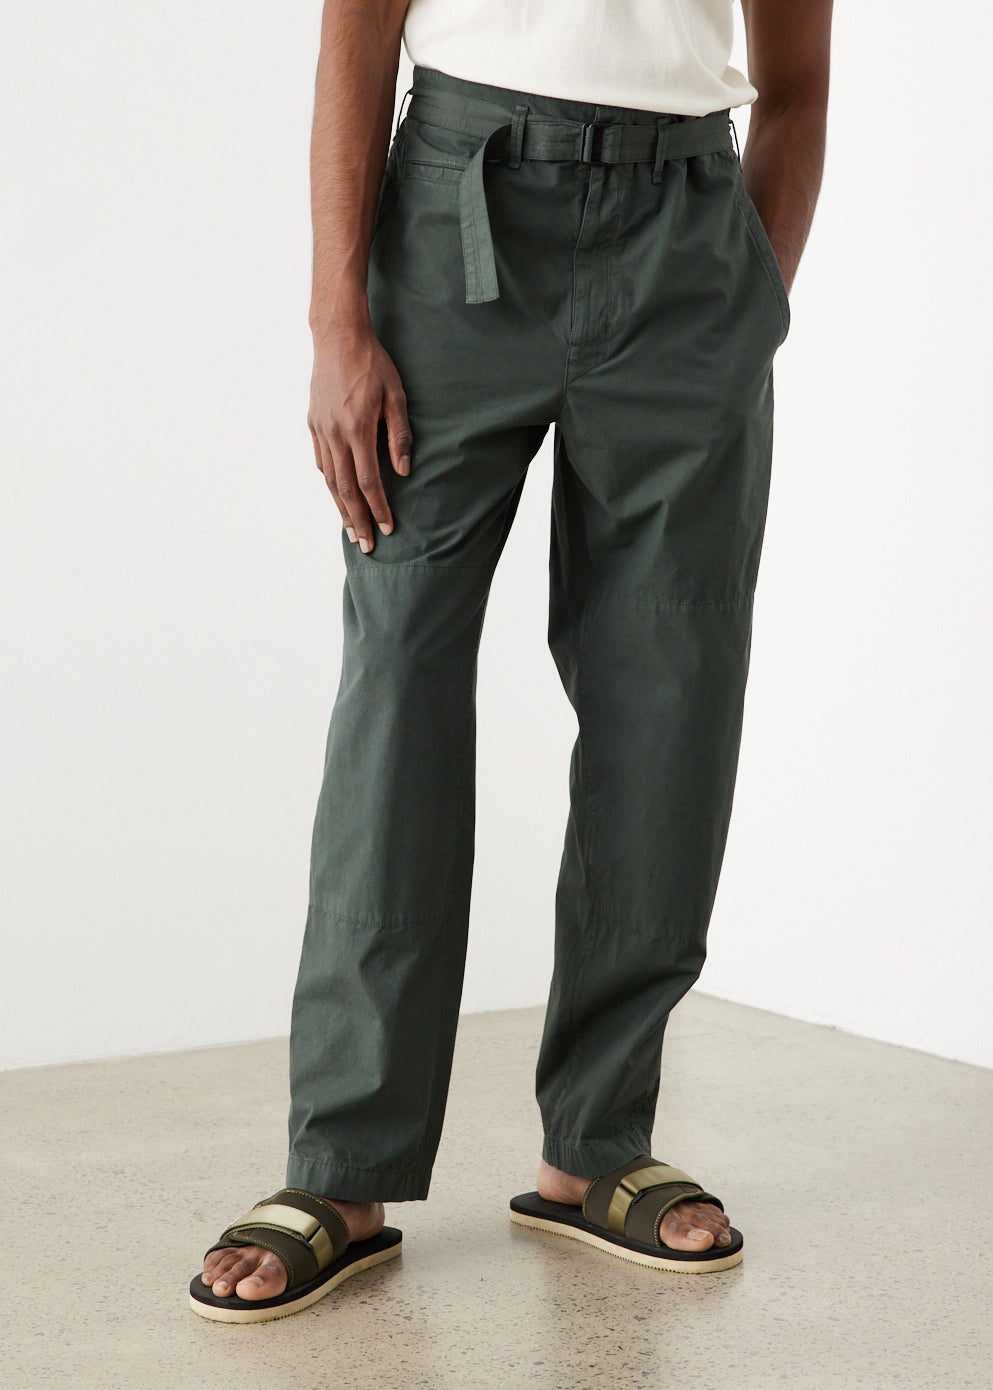 lemaire 21aw trench pants size 46-